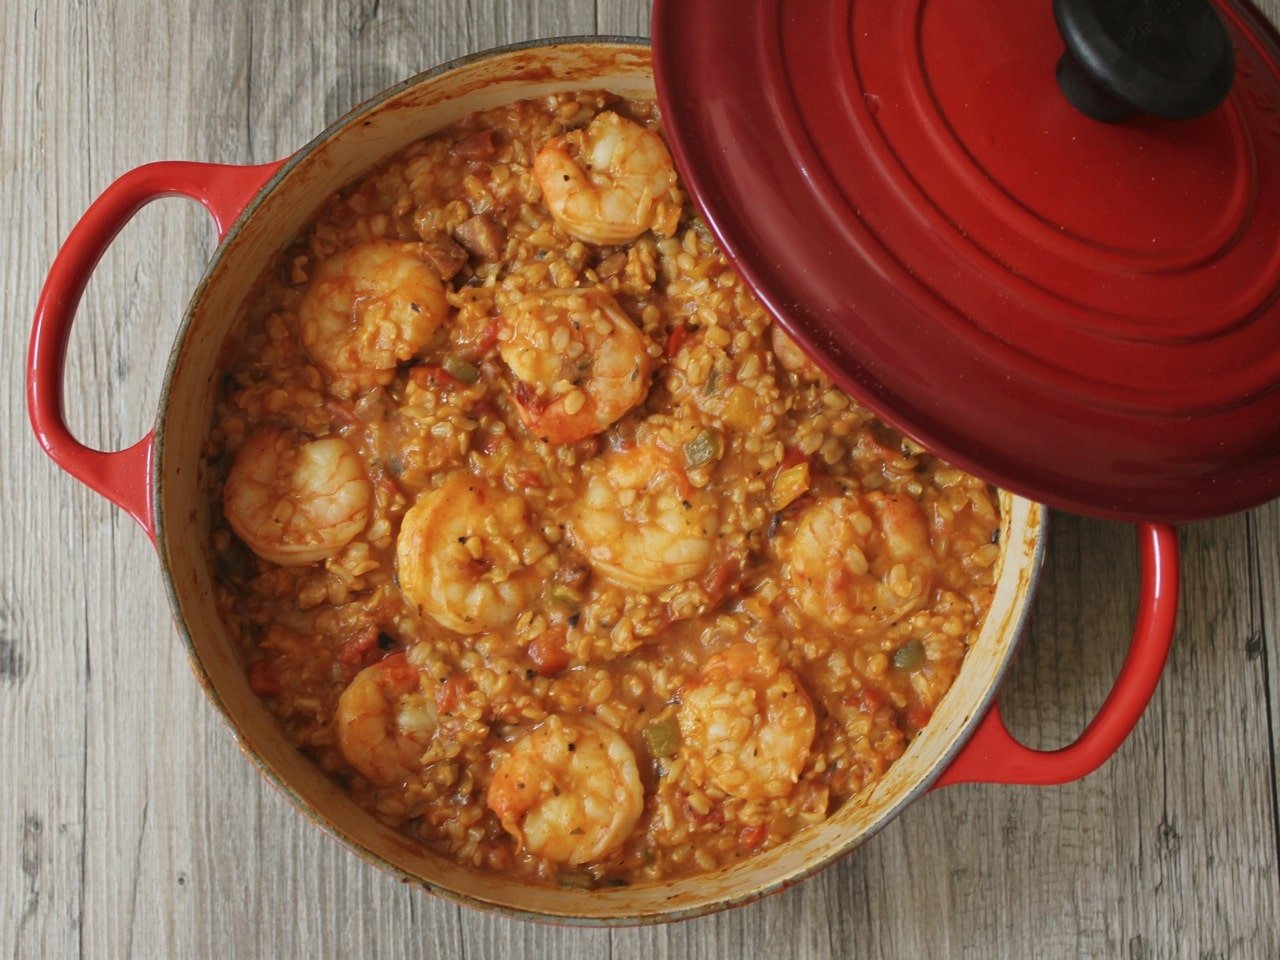 brown-rice-jambalaya-with-shrimp-chicken-sausage-and-bell-peppers